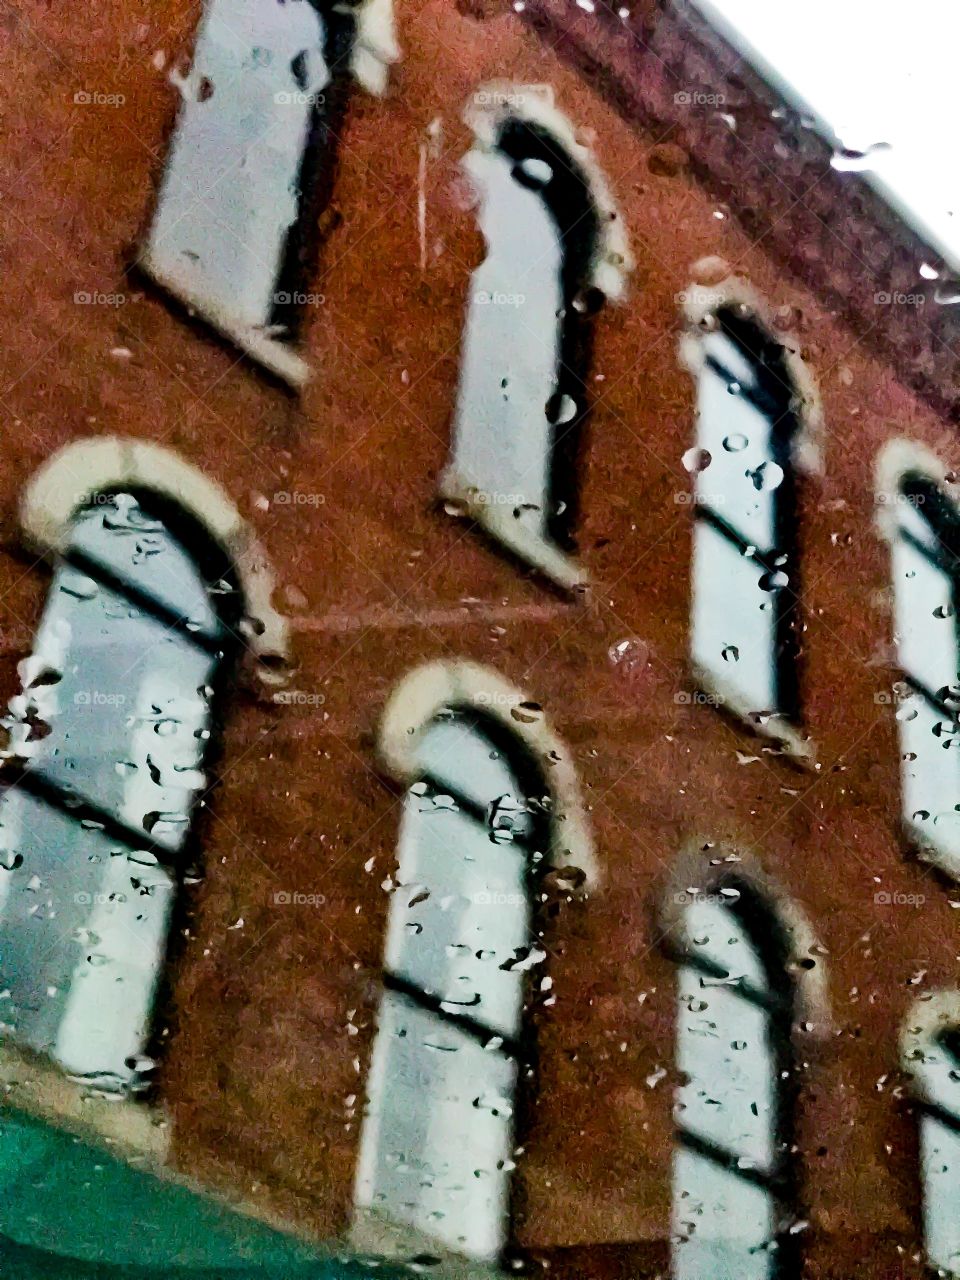 Raindrops on a sunroof looking at a building downtown
